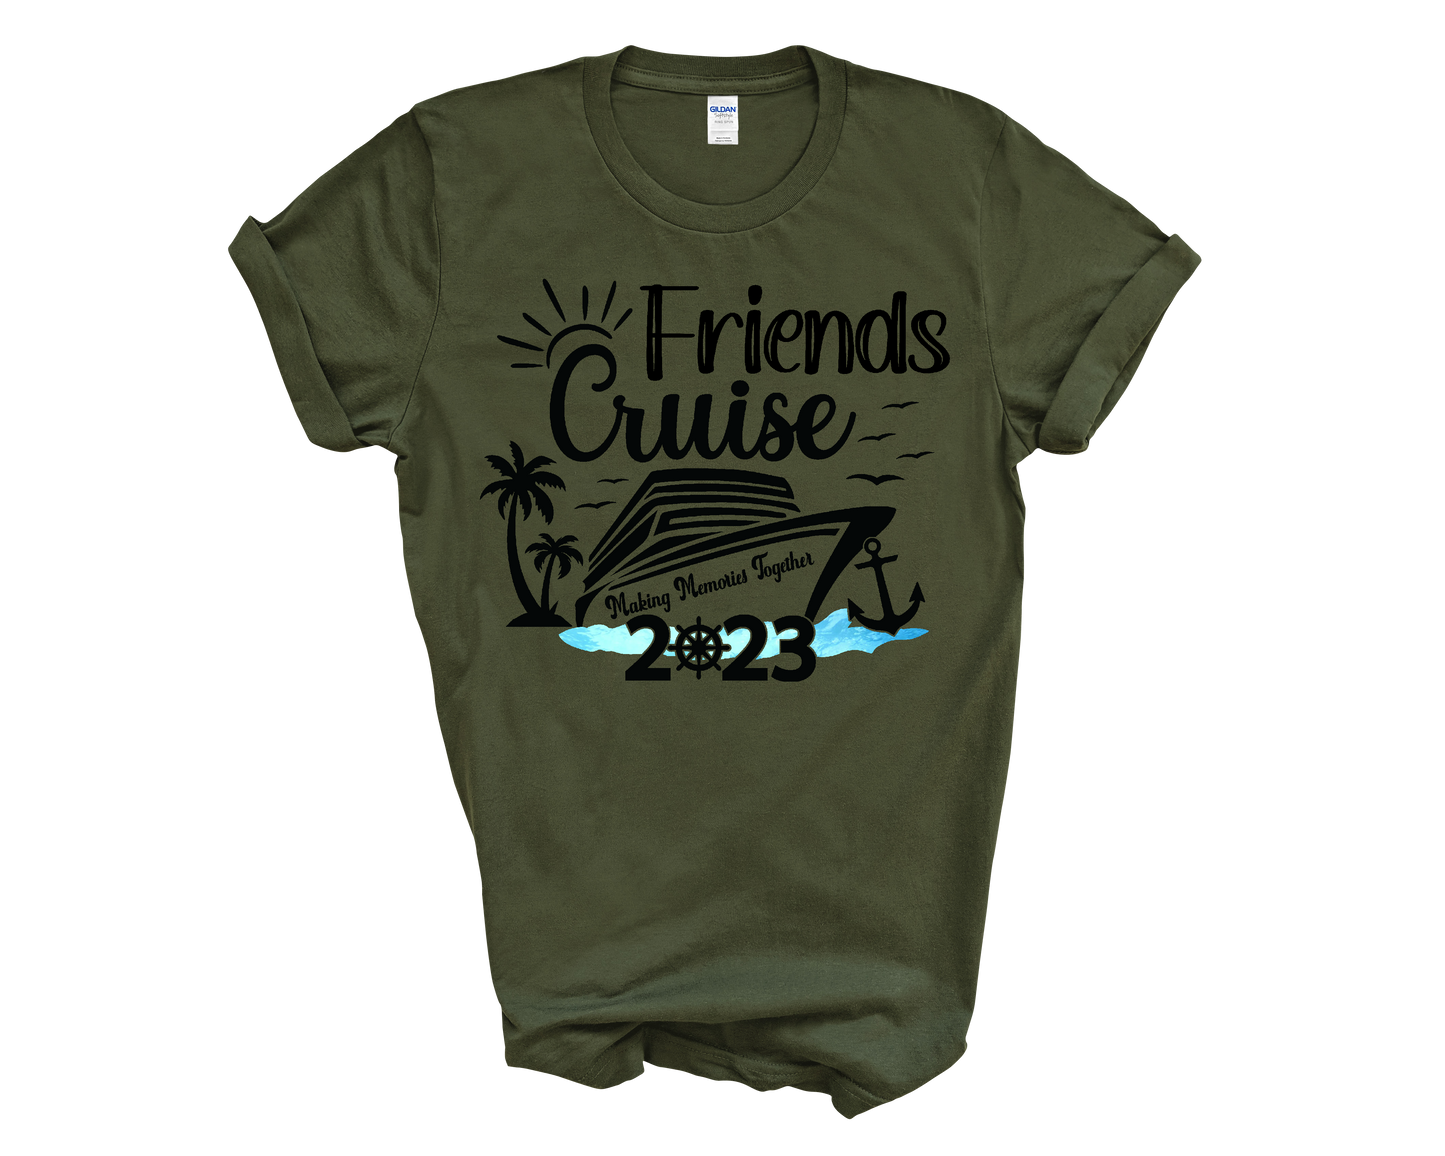 Friends Cruise Making Memories Together Adult Cotton T-shirt